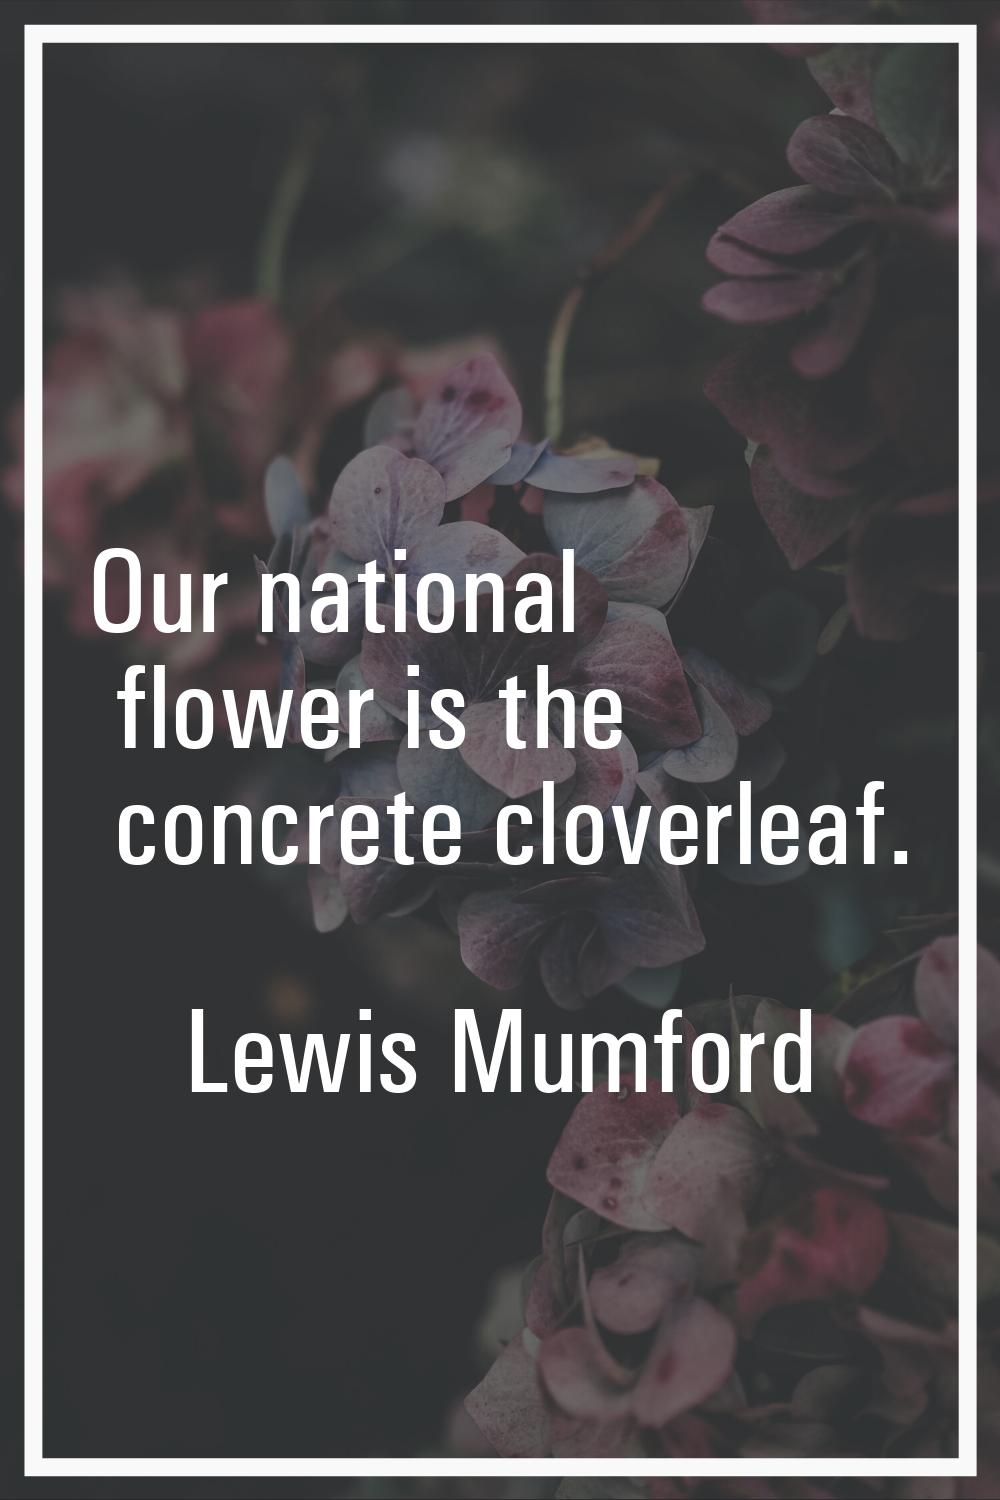 Our national flower is the concrete cloverleaf.